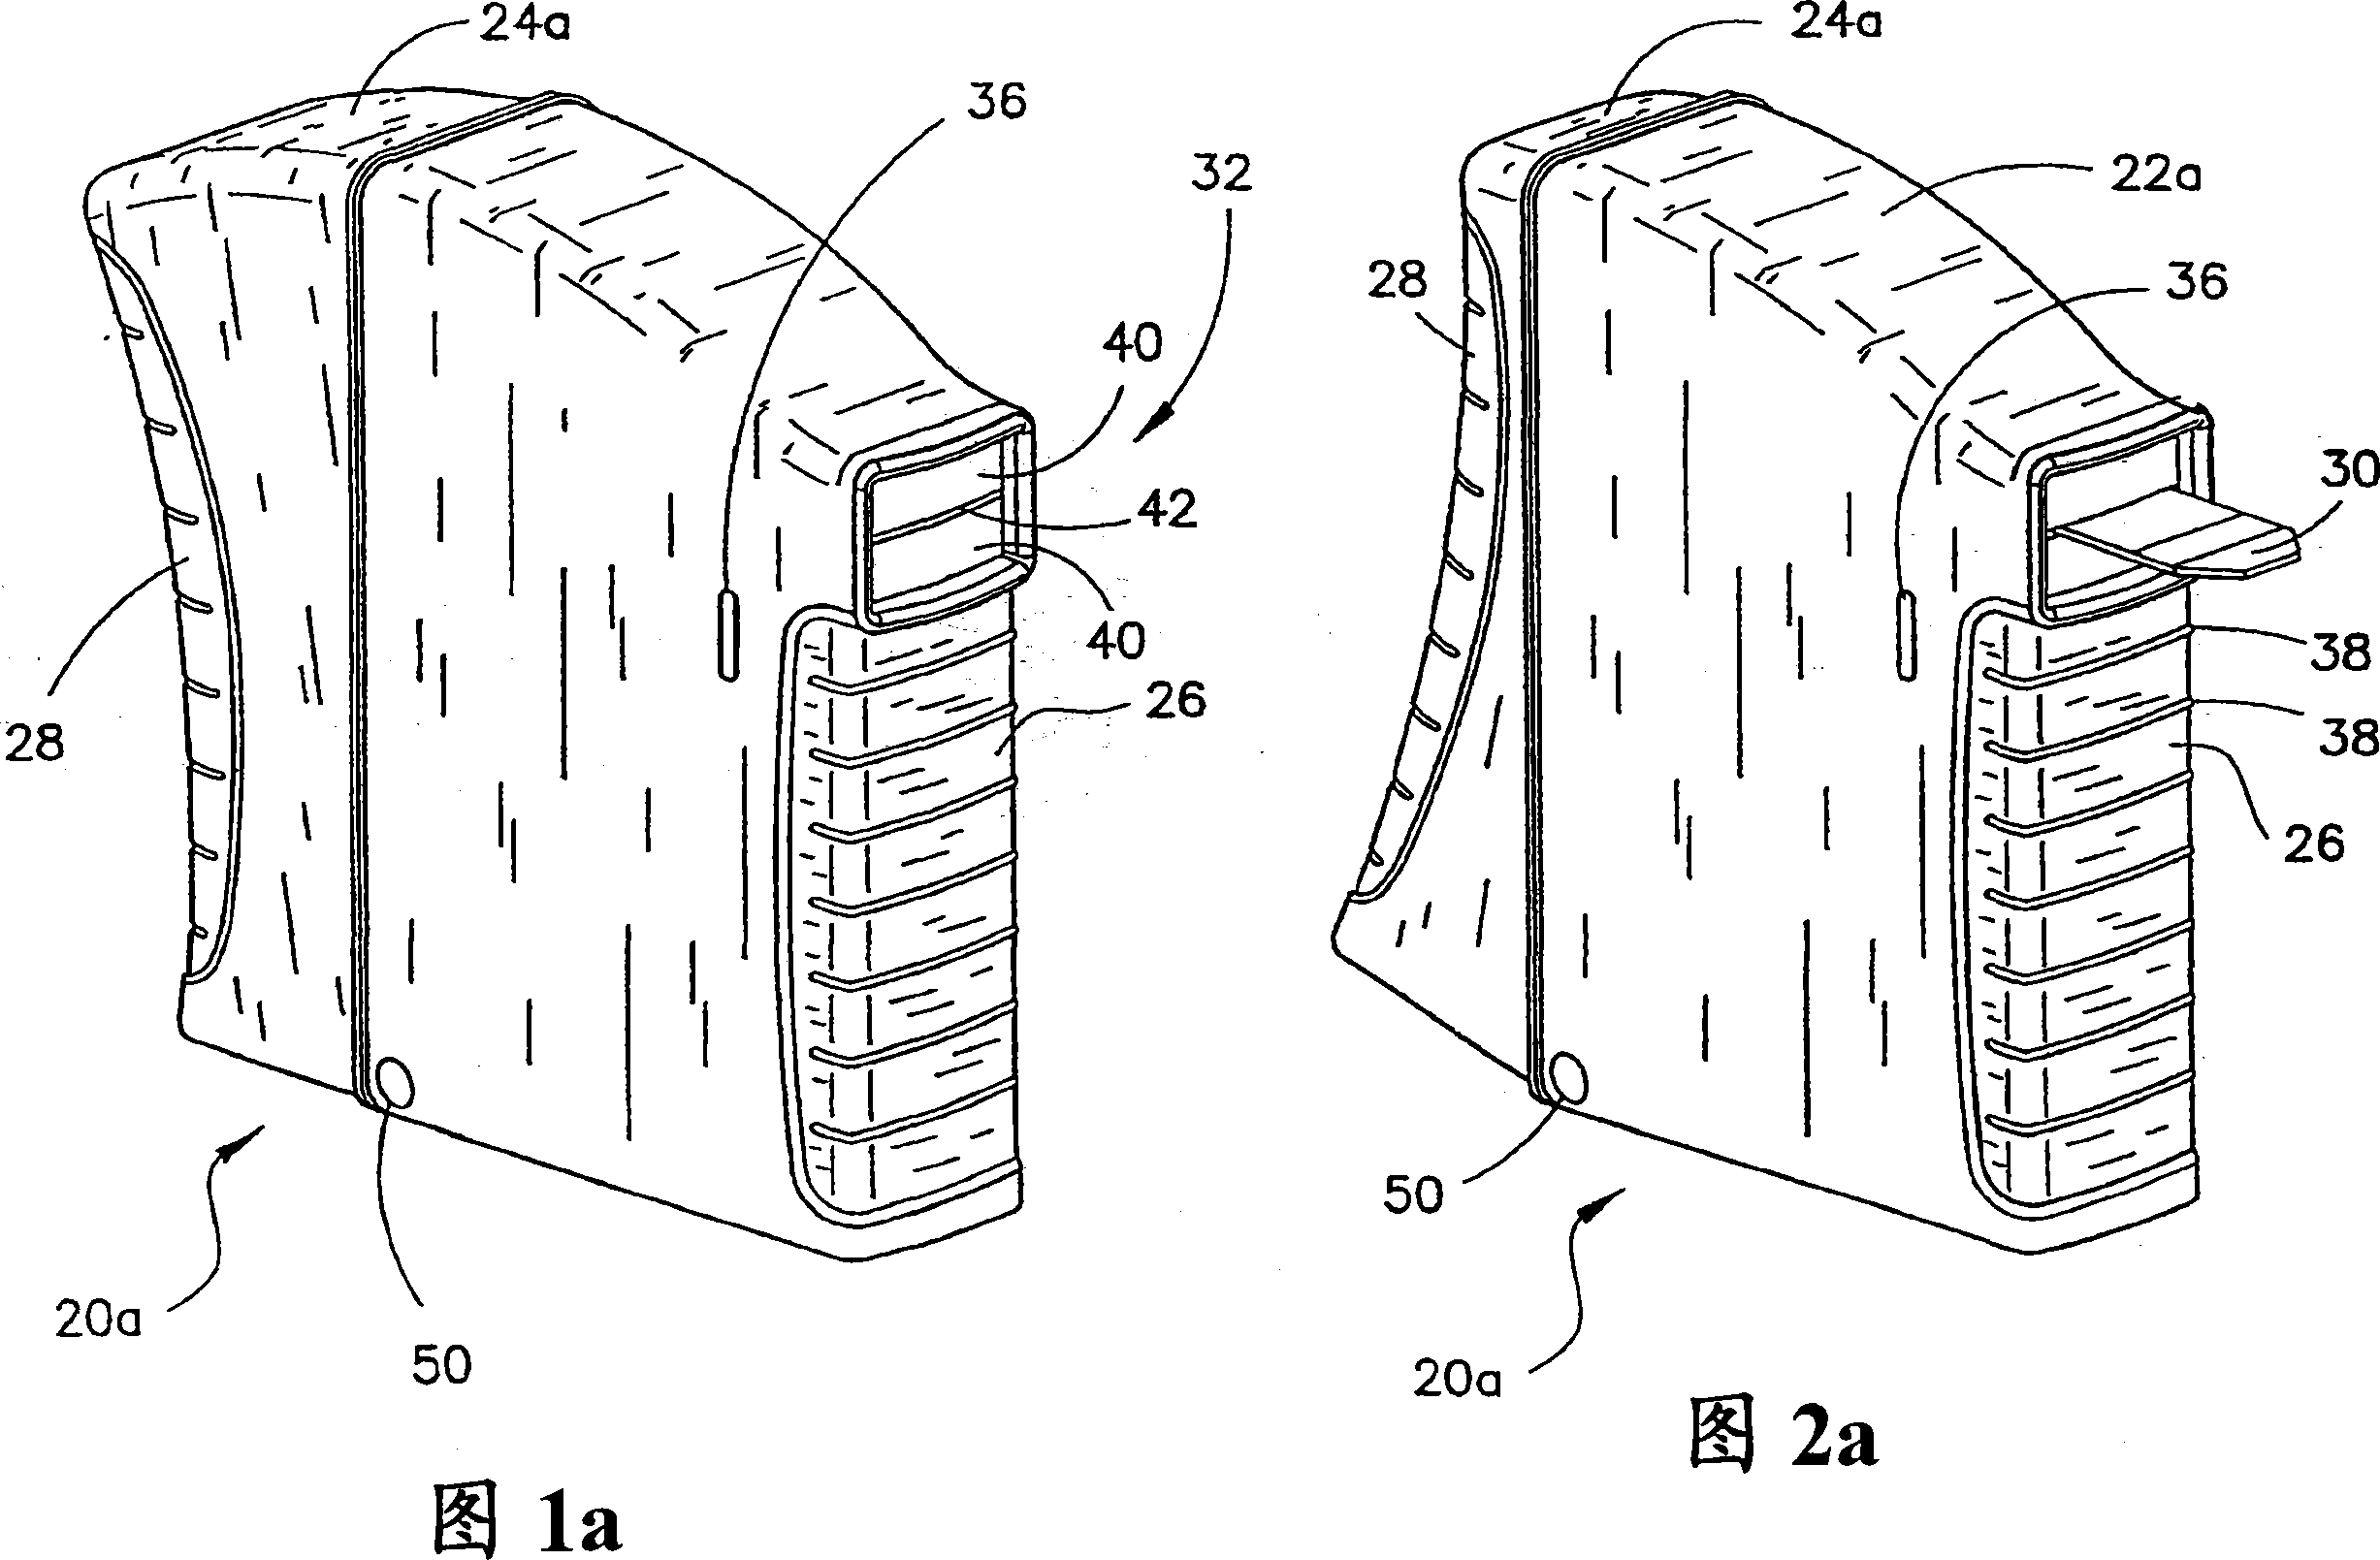 Dispenser for flattened articles such as diagnostic test strips